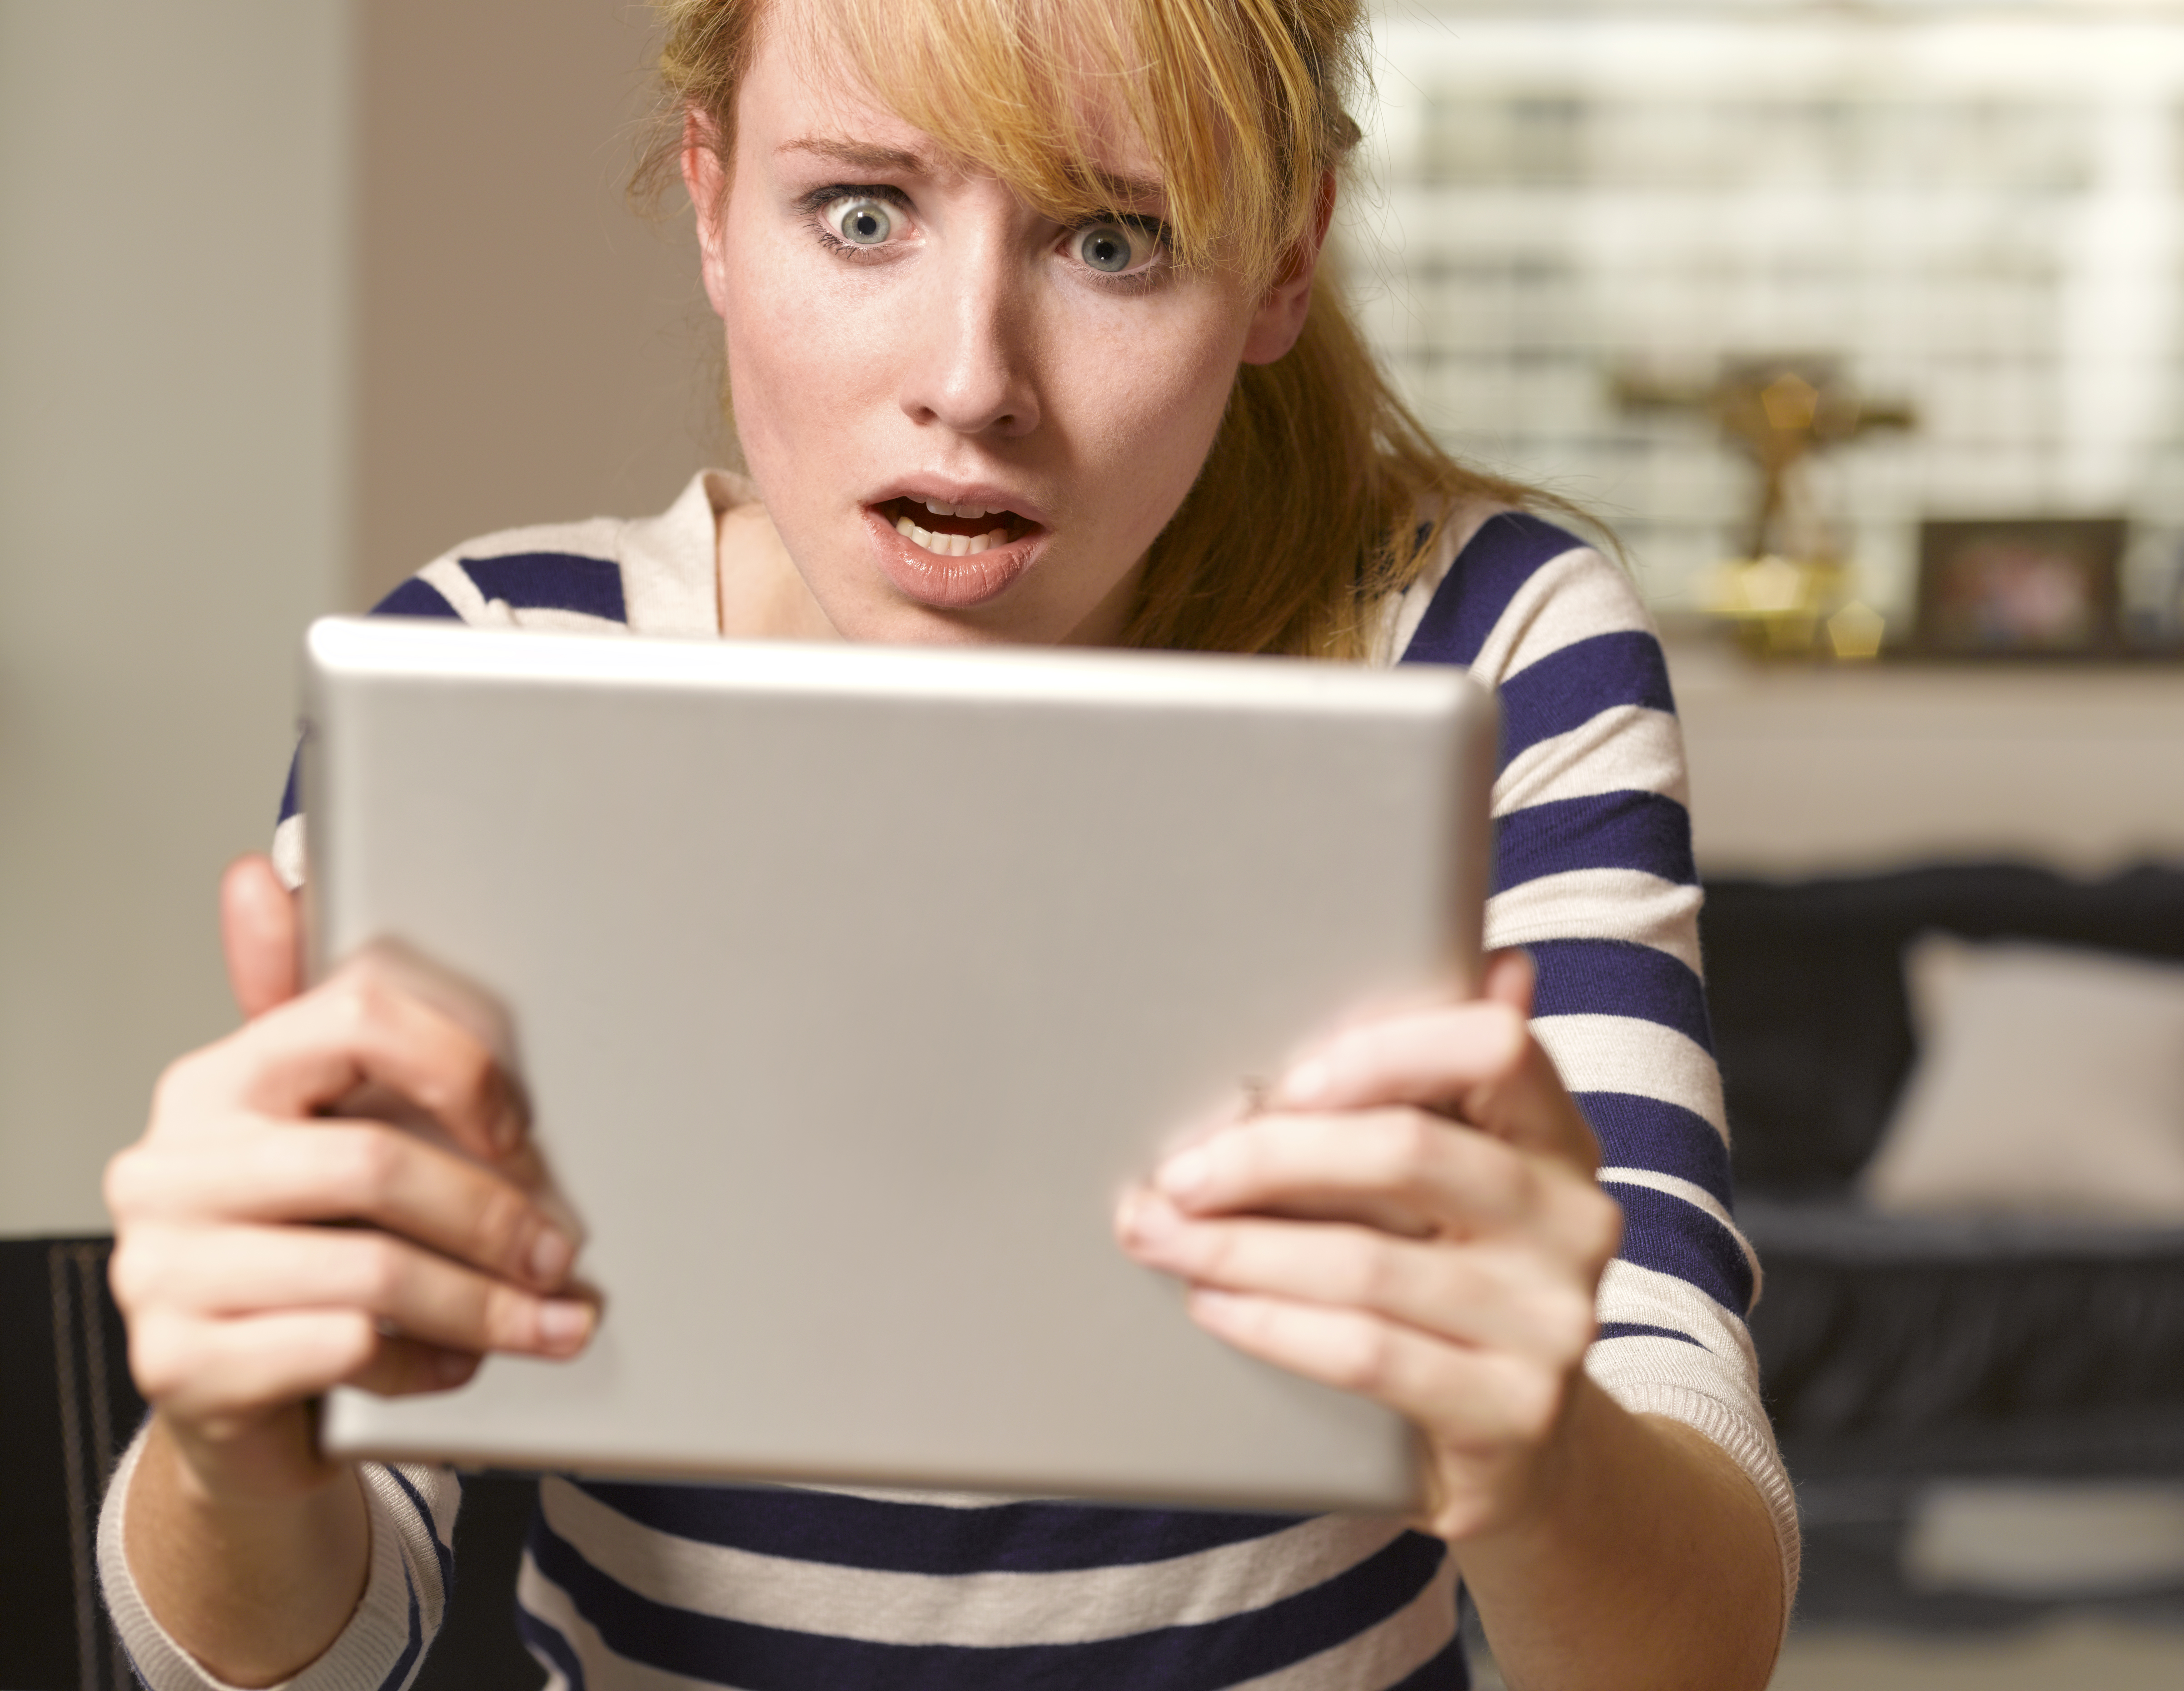 A shocked woman looking at a tablet | Source: Getty Images